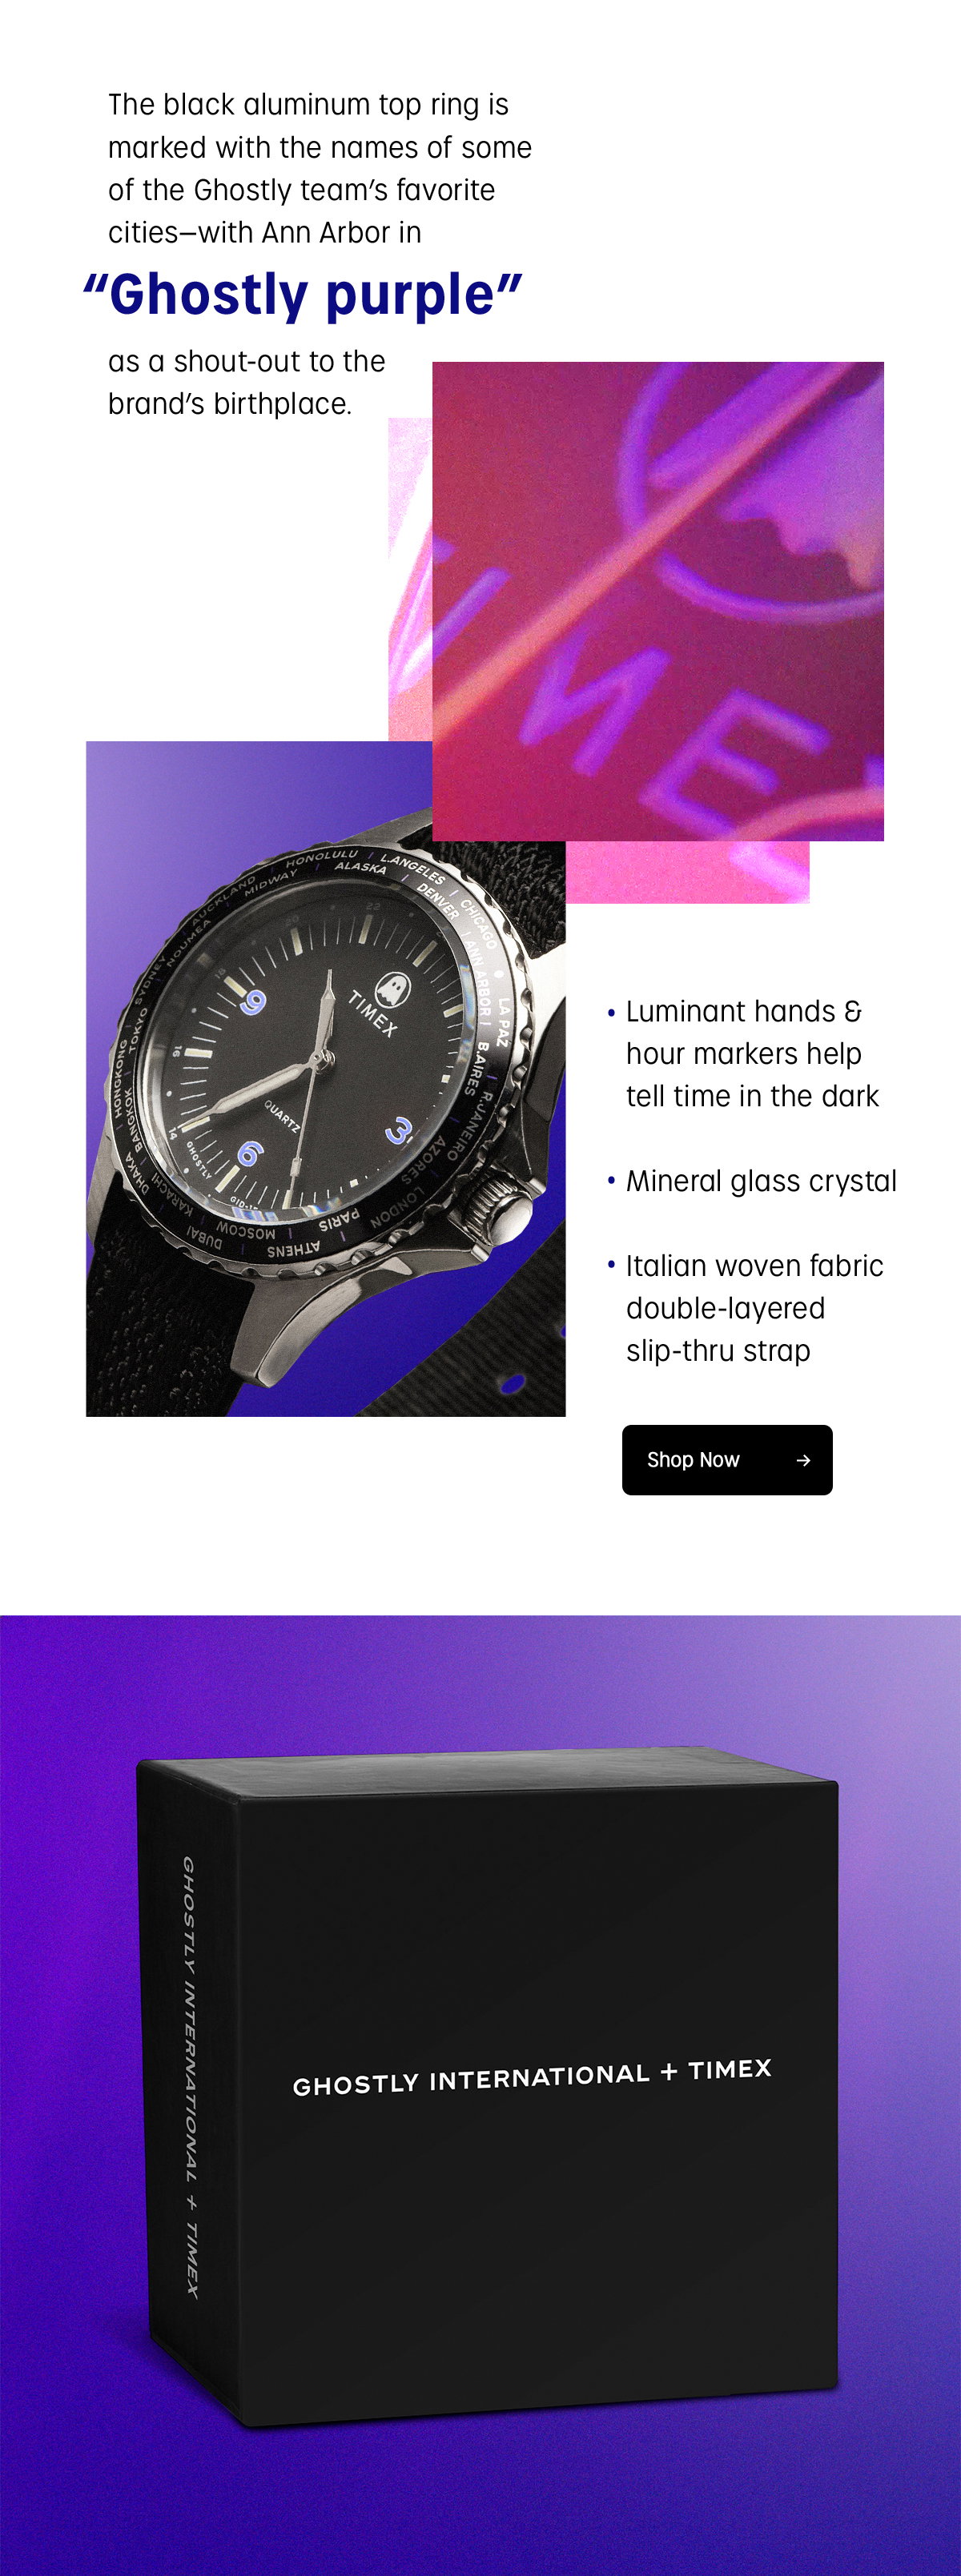 The black aluminum top ring is marked with the names of some of the Ghostly team's favorite cities-with Ann Arbor in "Ghostly Purple" as a shout-out to the brand's birthplace. | Luminant hands & hour markers help tell time in the dark | Mineral glass crystal | Italian woven fabric double-layered slip-thru strap | Shop Now